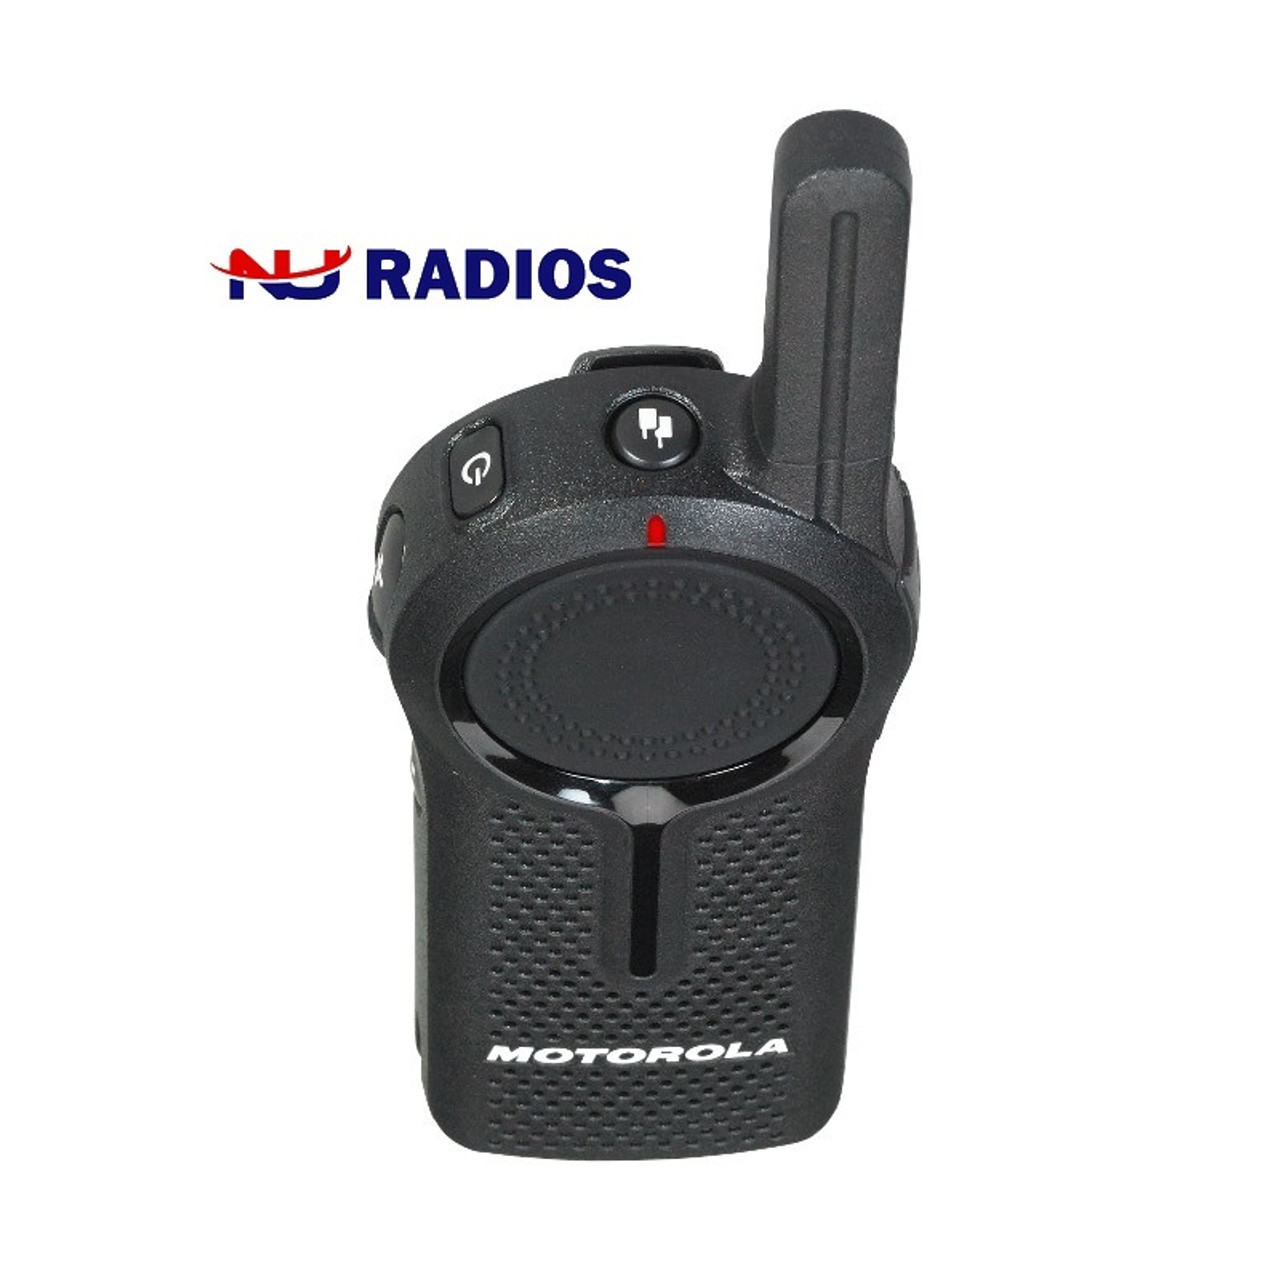 Motorola DLR1060 6CH Digital 2-Way Radio for business is a LICENSE FREE walkie  talkie that includes a holster, battery and AC charger.